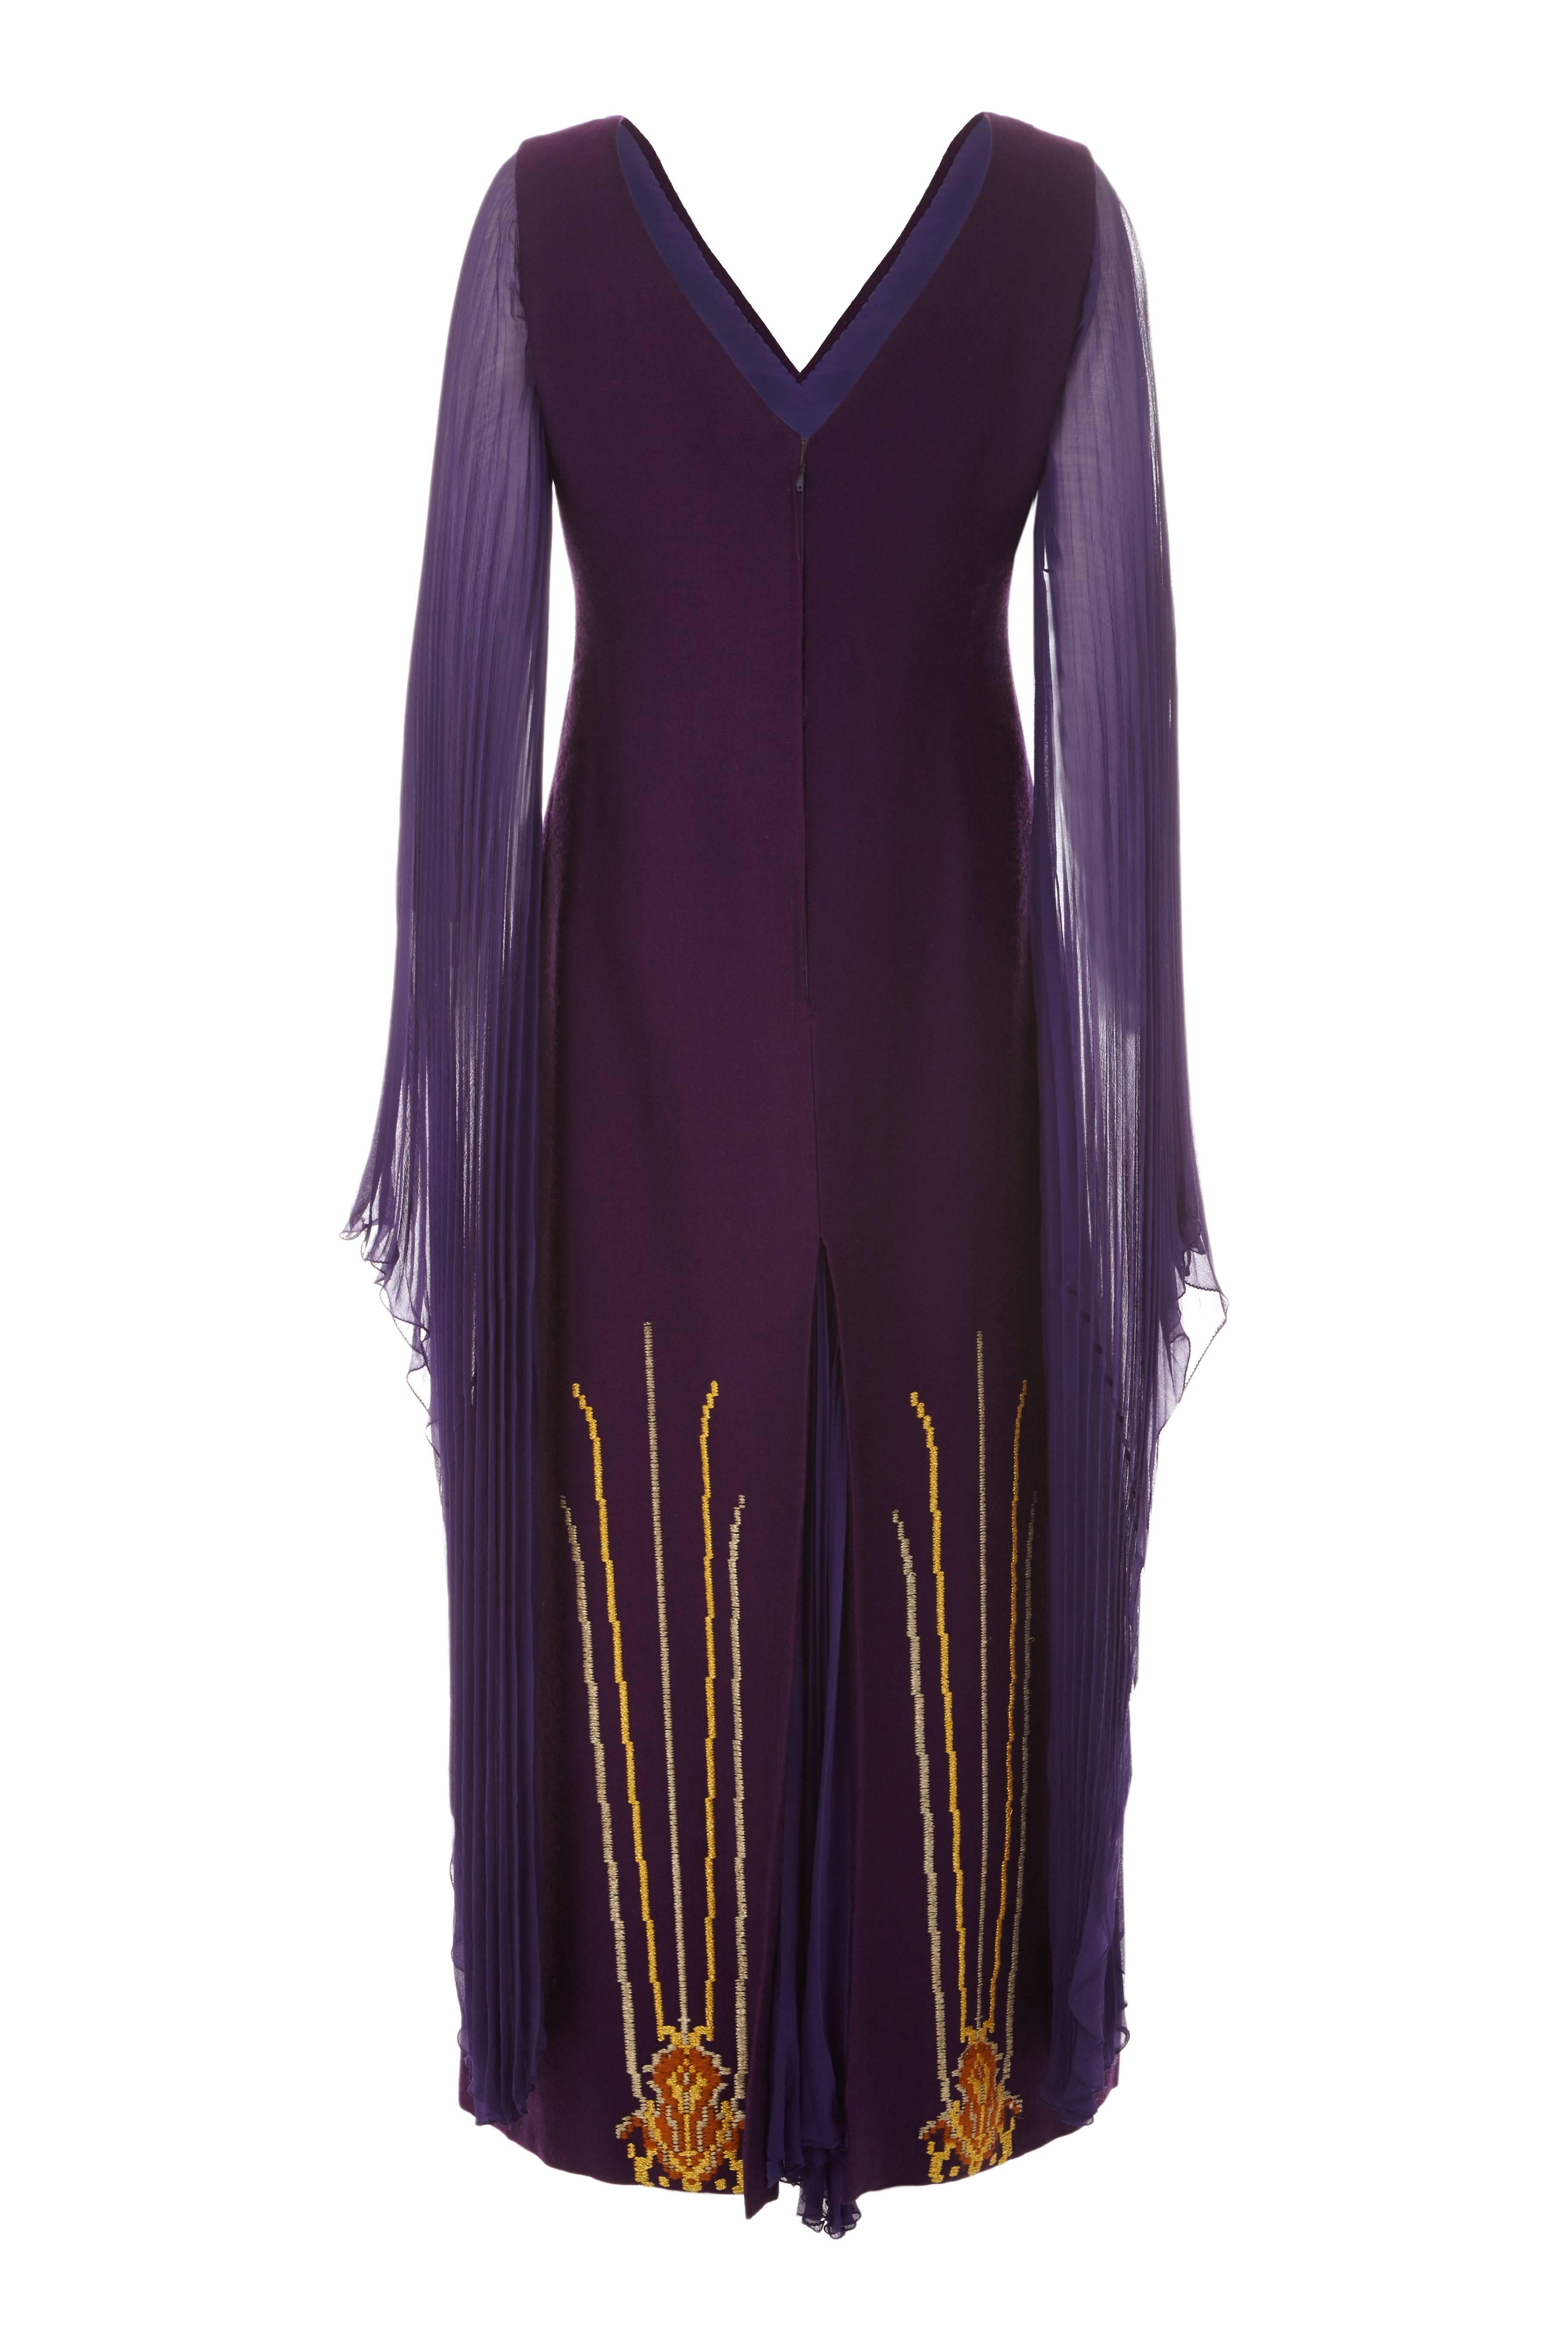 This extraordinary 1970s full length purple wool couture dress is by Greek couture dress is by celebrated Greek designer Nikos-Takis and is of excellent quality. This unusual piece features stylised gold embroidery on the hem and sensational sheer